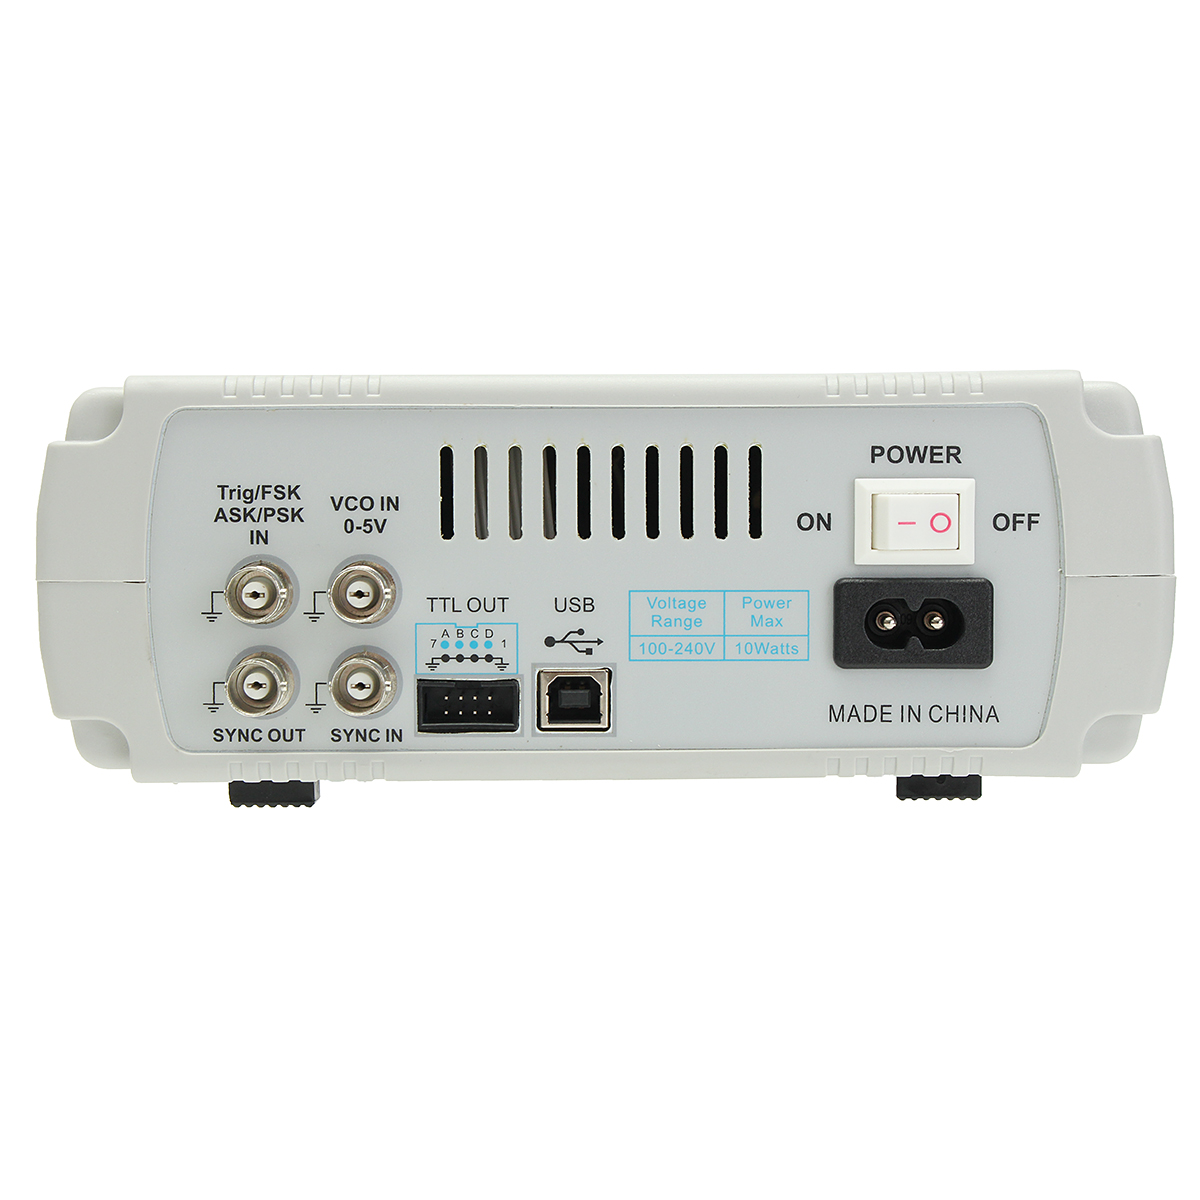 FY6600 Digital 12-60MHz Dual Channel DDS Function Arbitrary Waveform Signal Generator Frequency Meter 19